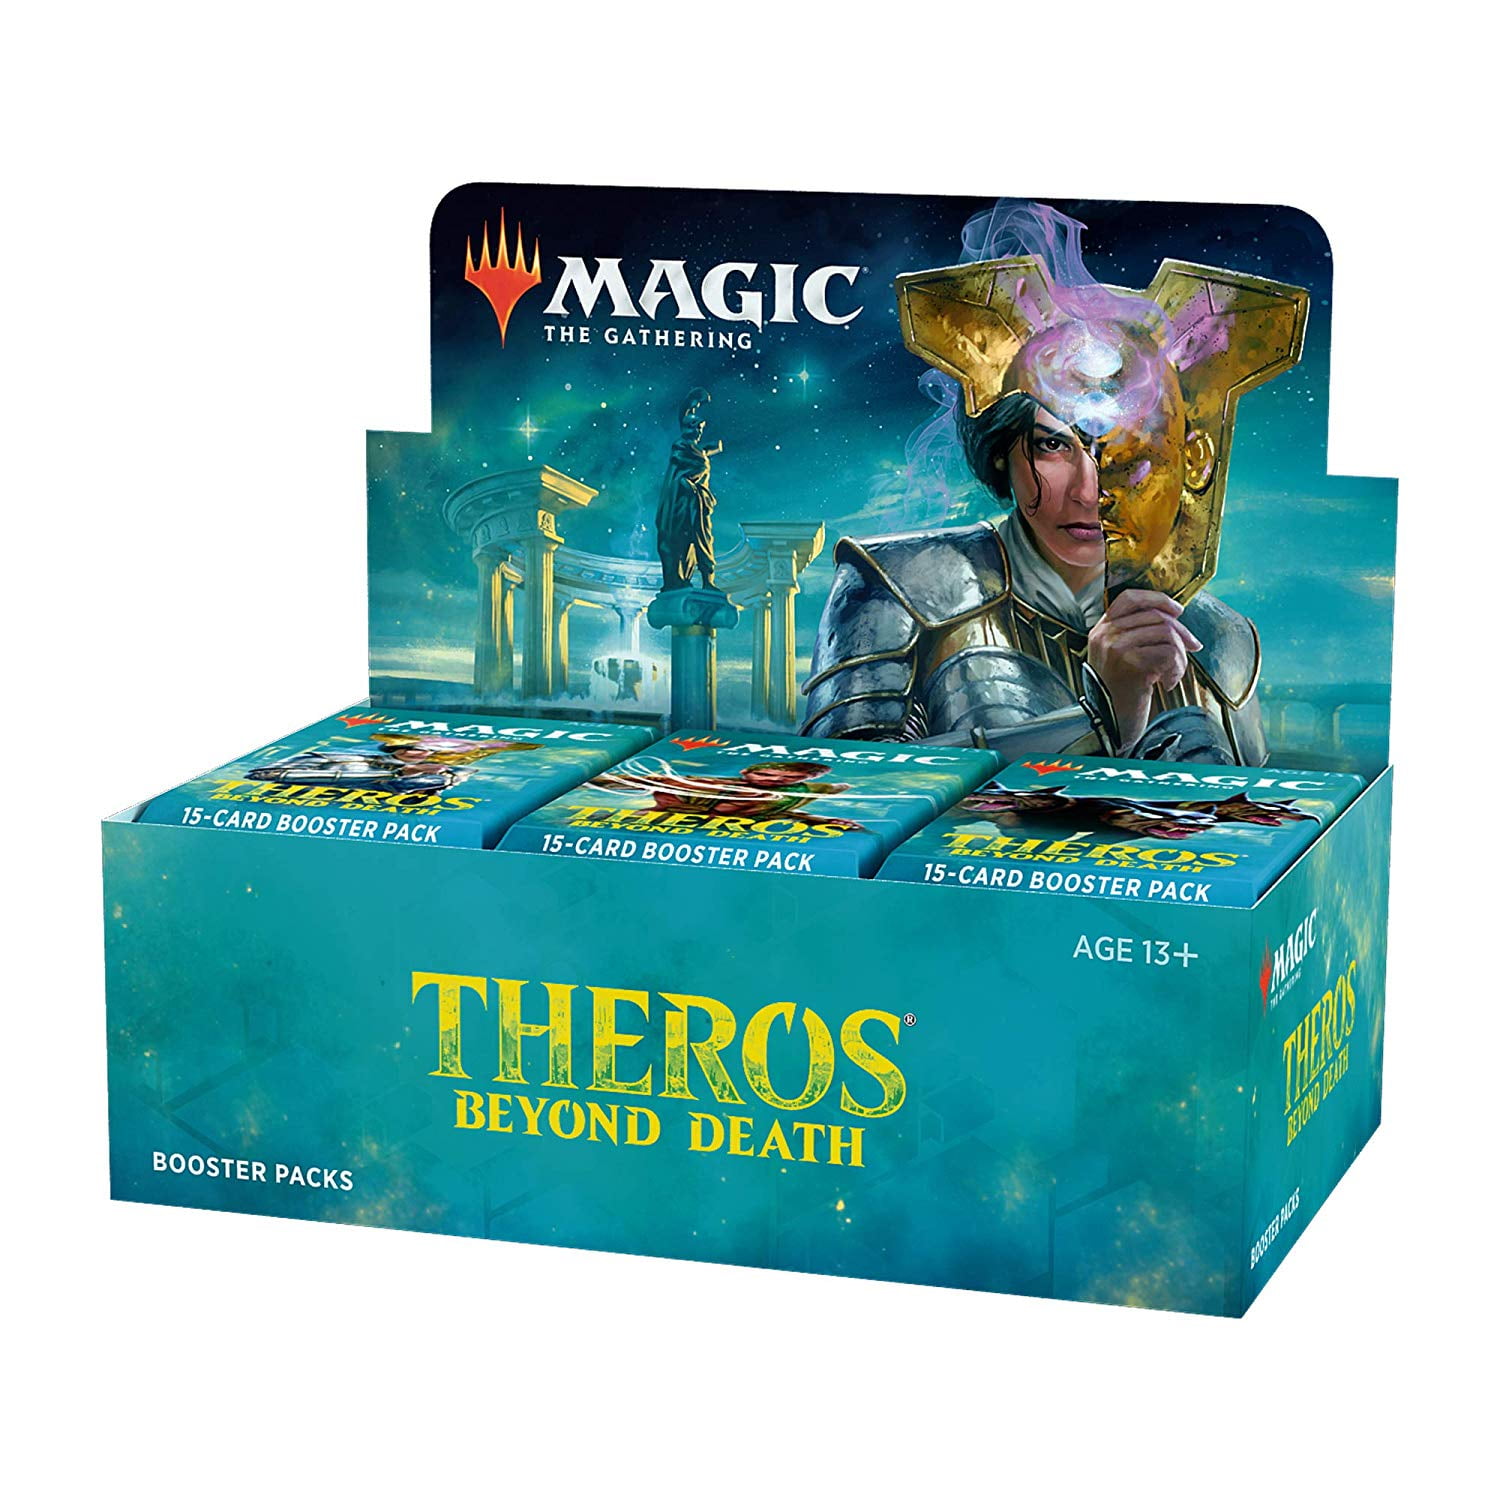 540 Cards for sale online Wizards of the Coast C62540000 Magic The Gathering Theros Beyond Death Booster Box 